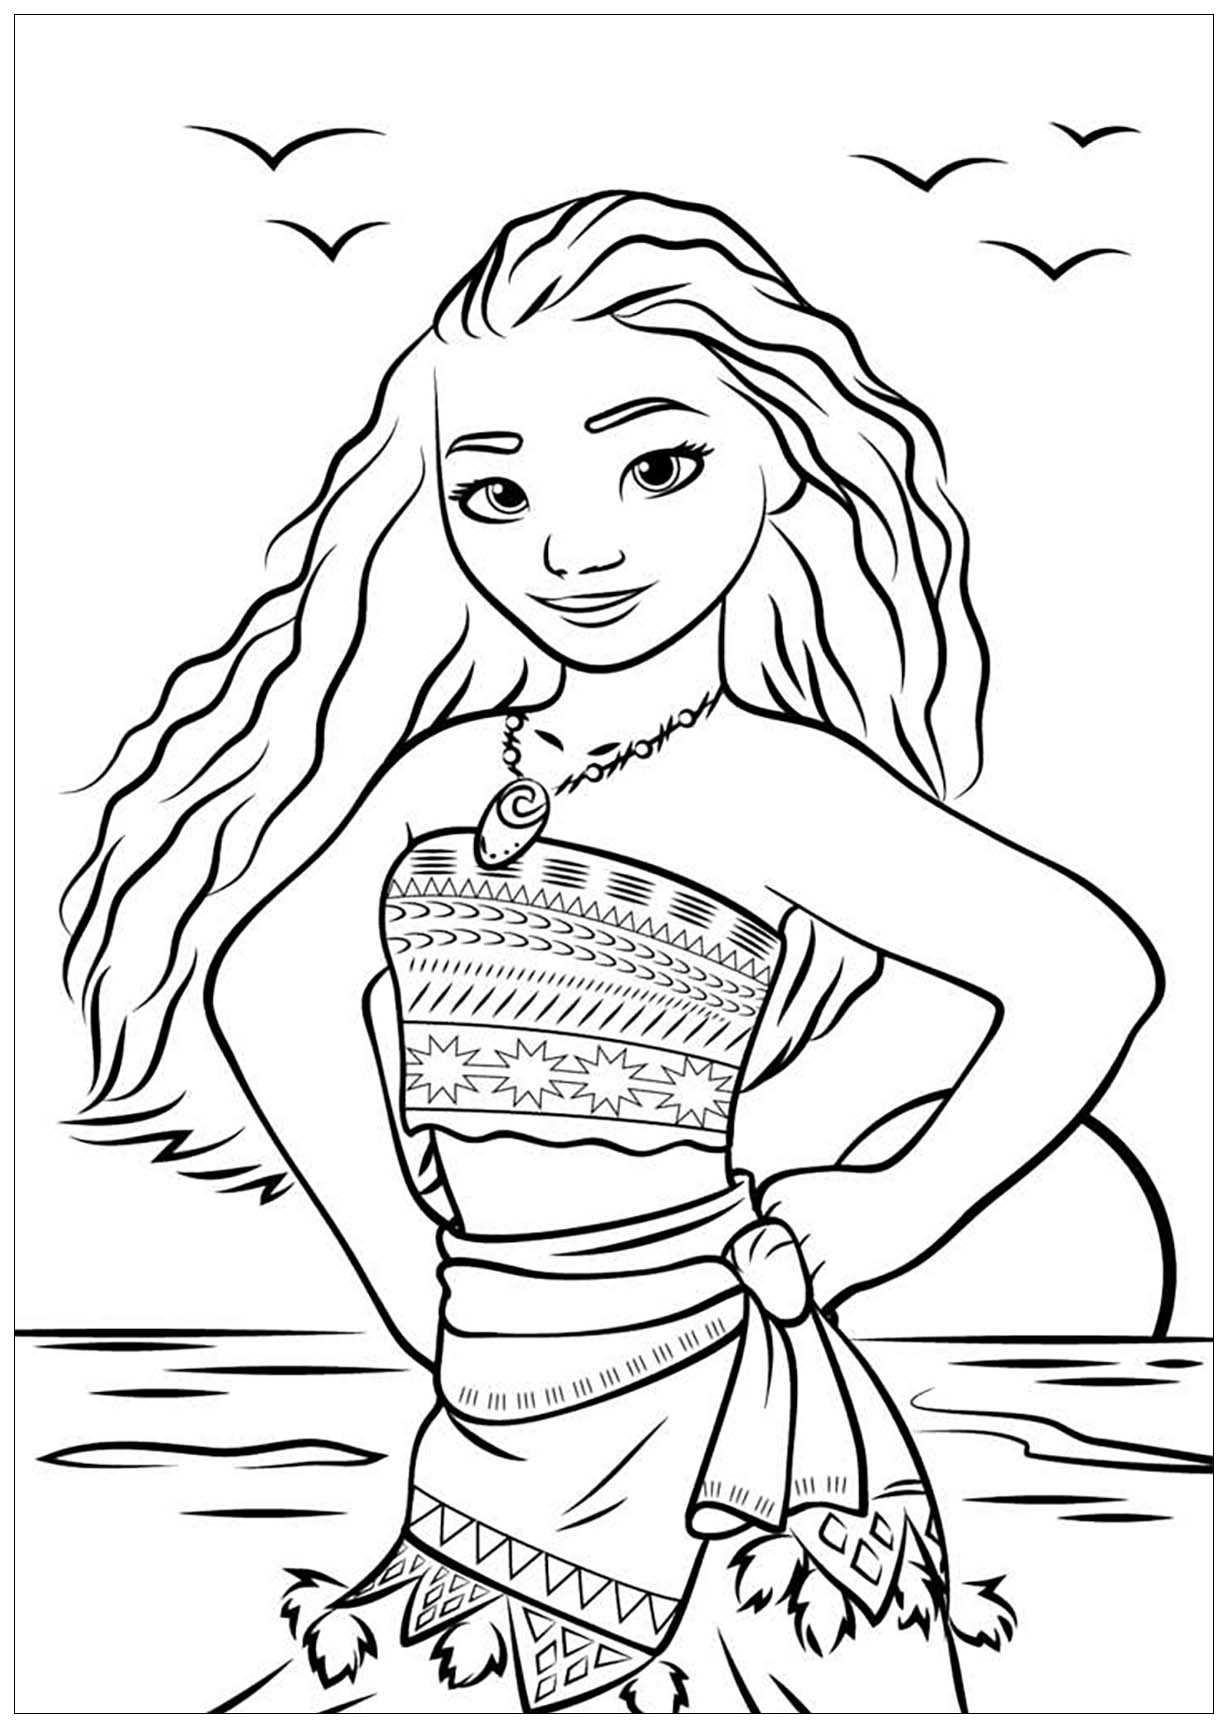 Moana Coloring Pages For Toddlers
 Moana to print for free Moana Kids Coloring Pages